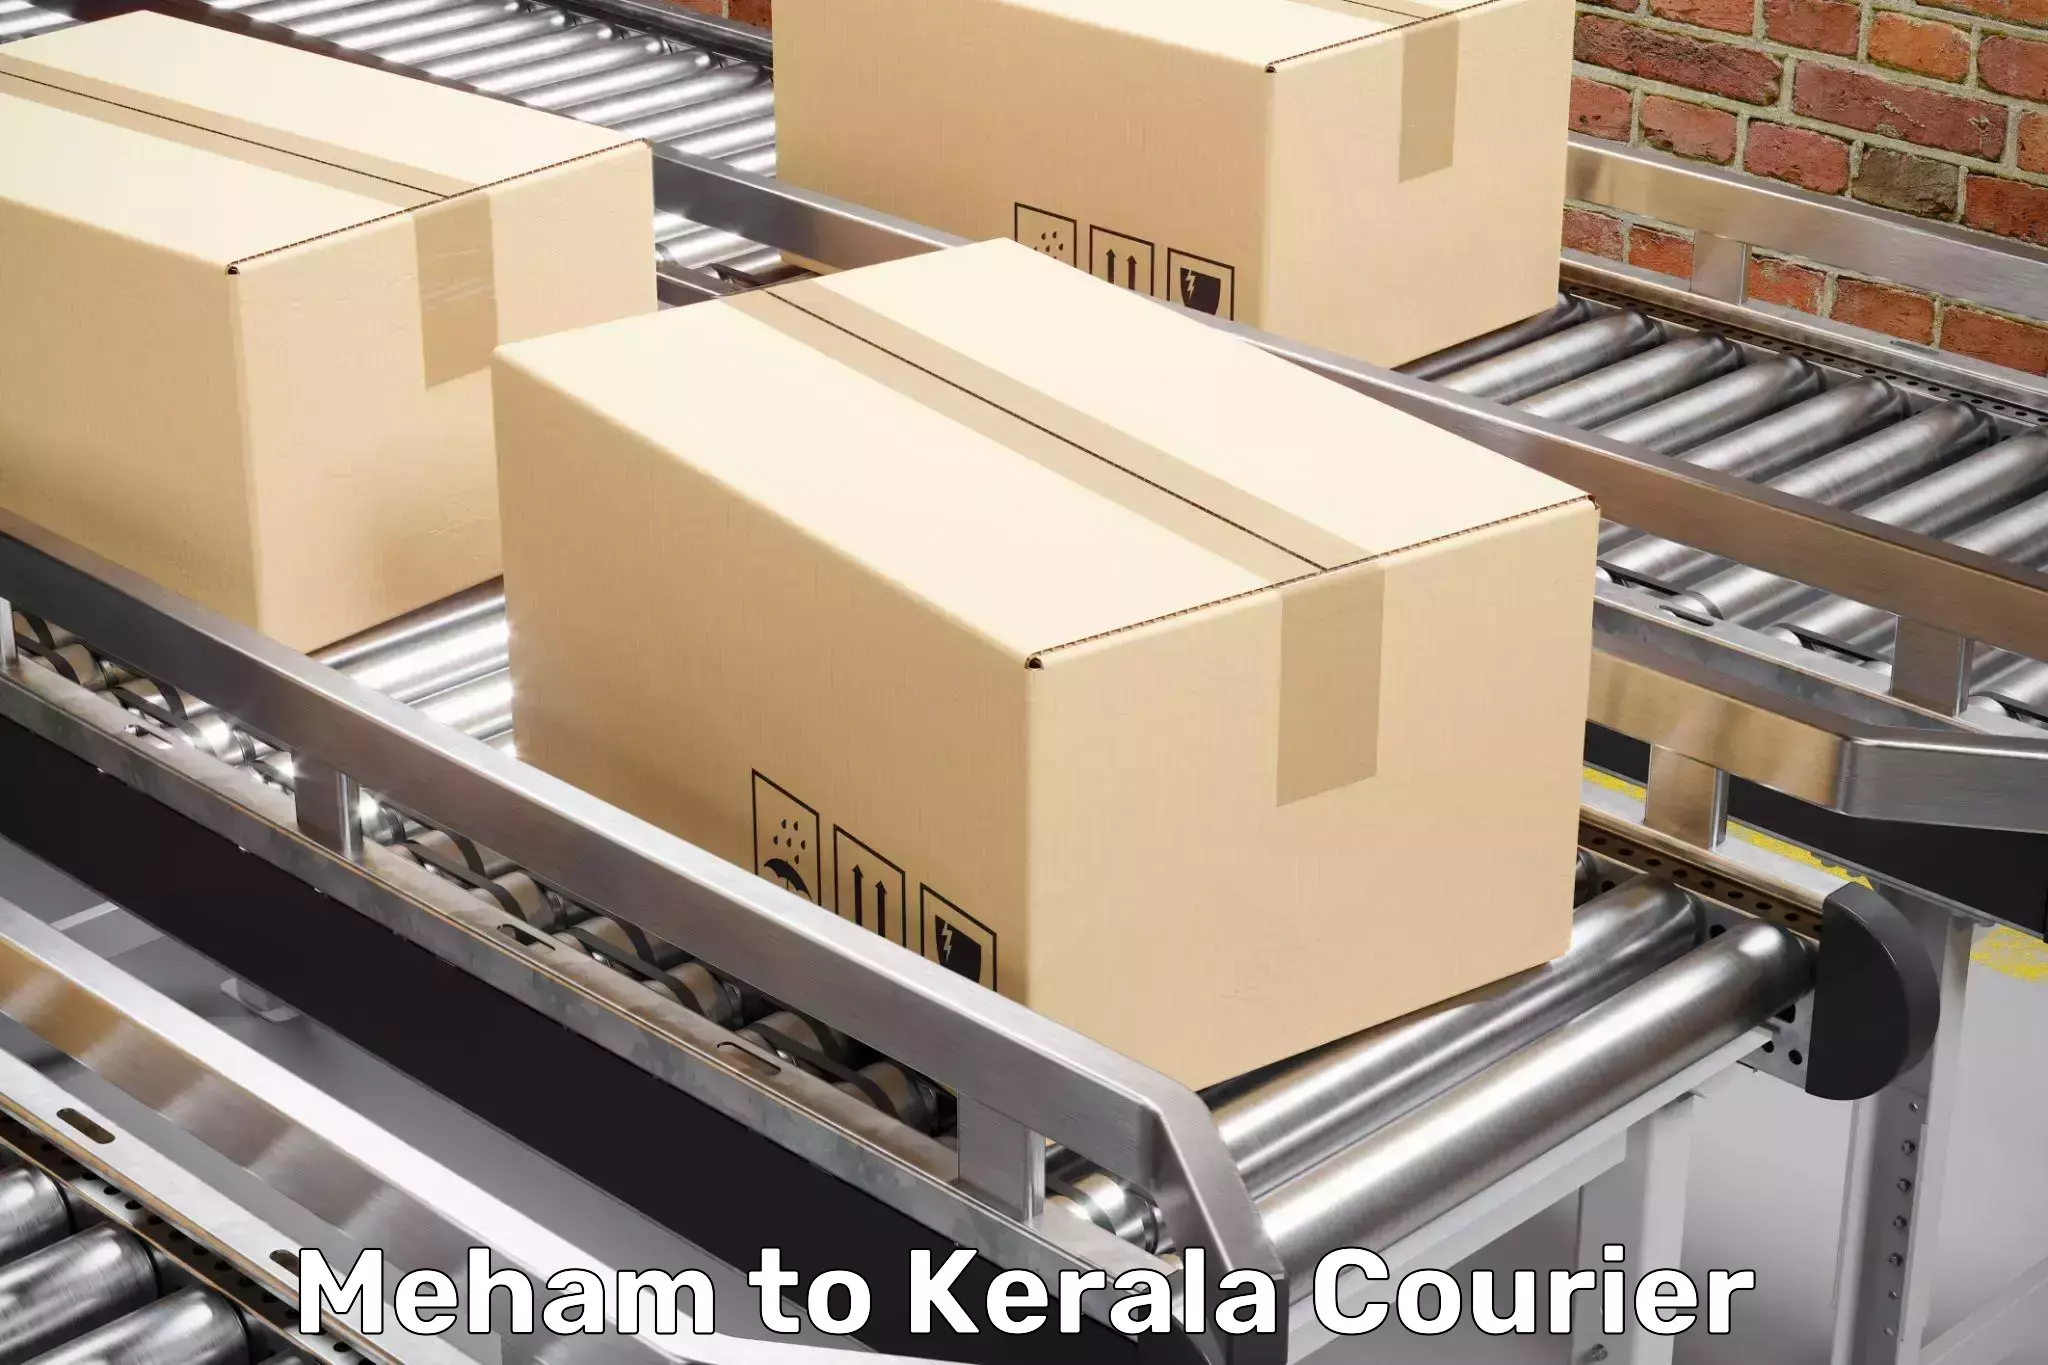 Advanced relocation solutions Meham to Kerala